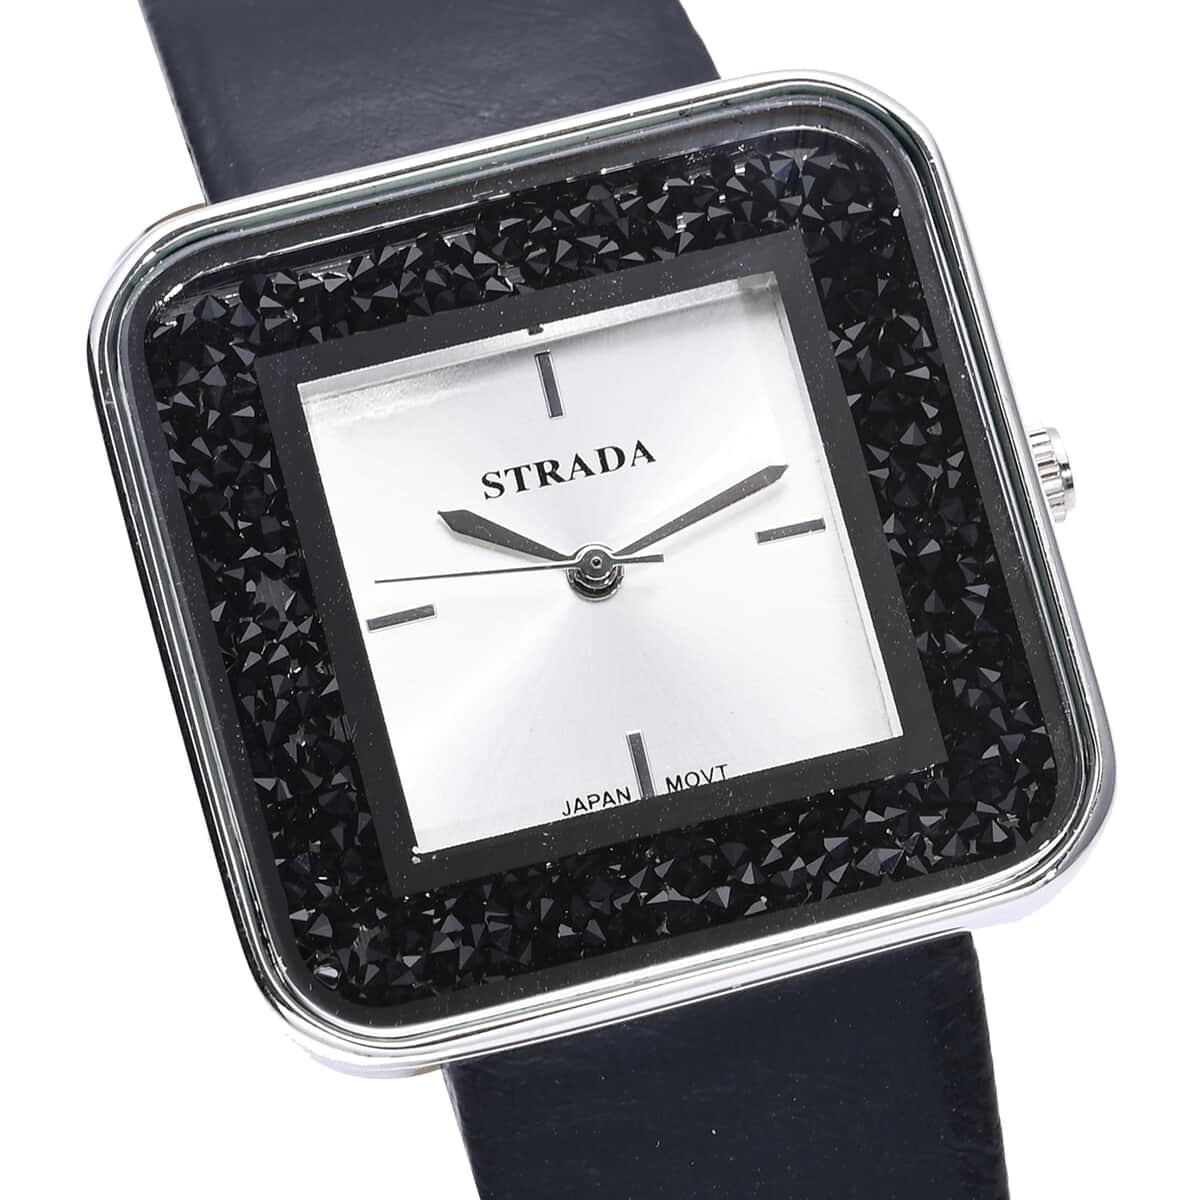 Strada Moving Black Austrian Crystal Japanese Movement Watch with Black Faux Leather Strap image number 3